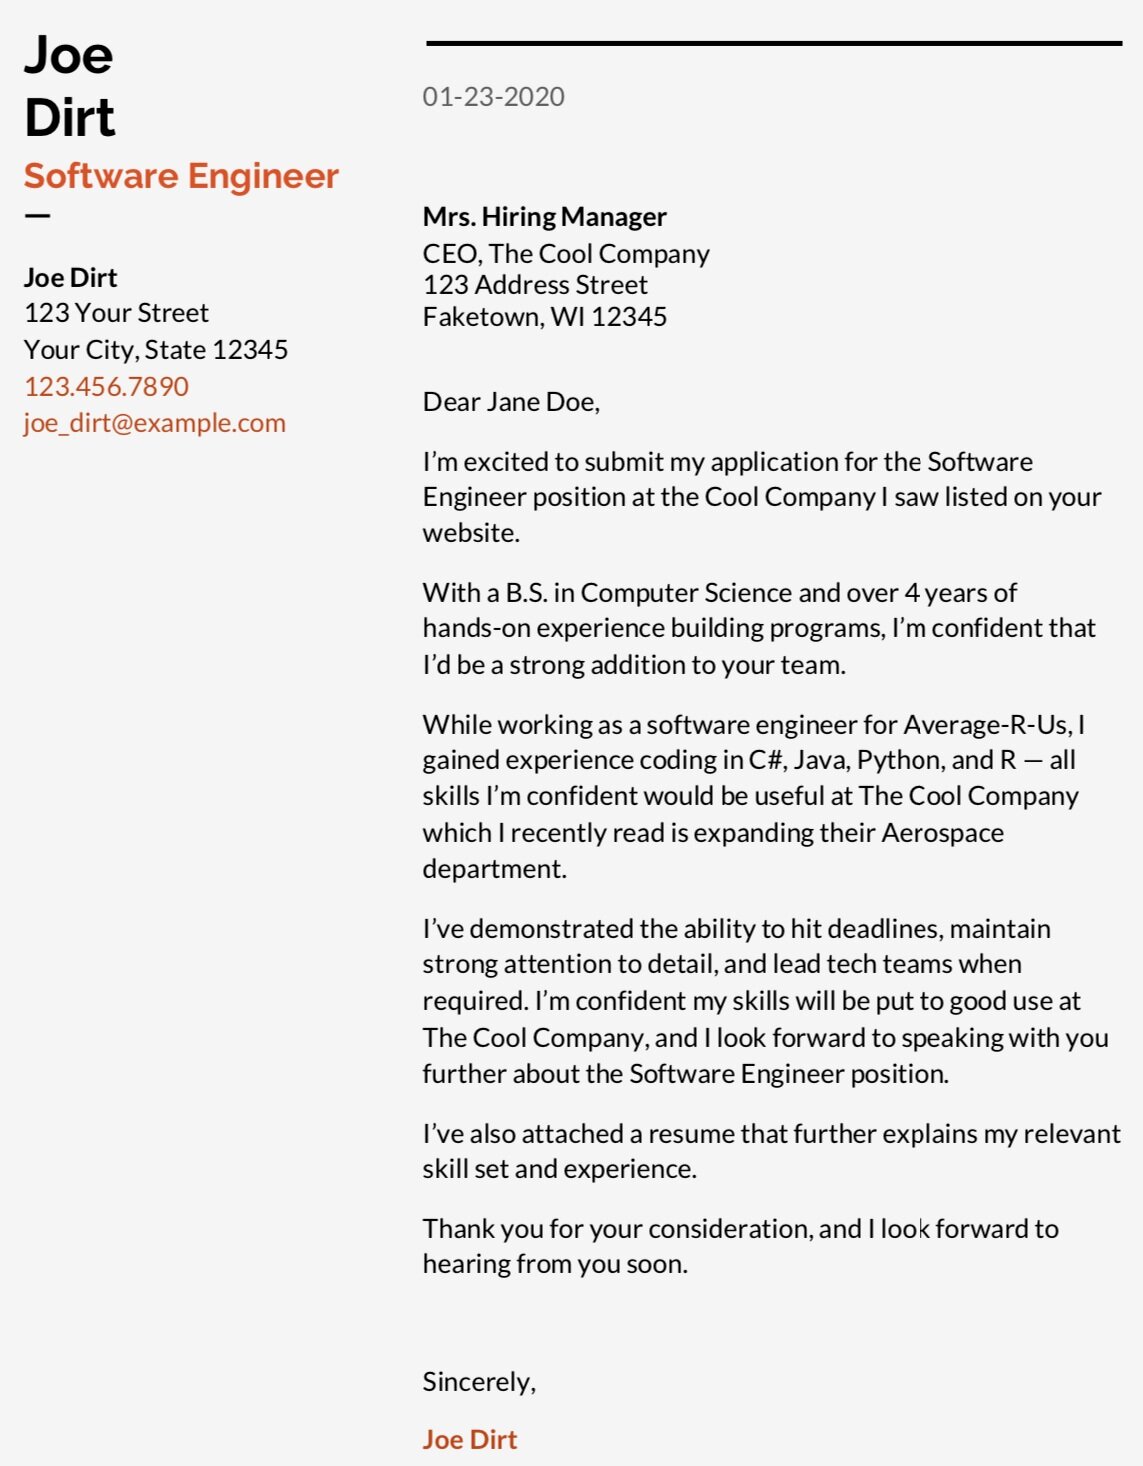 Sample Technical Cover Letter from images.squarespace-cdn.com